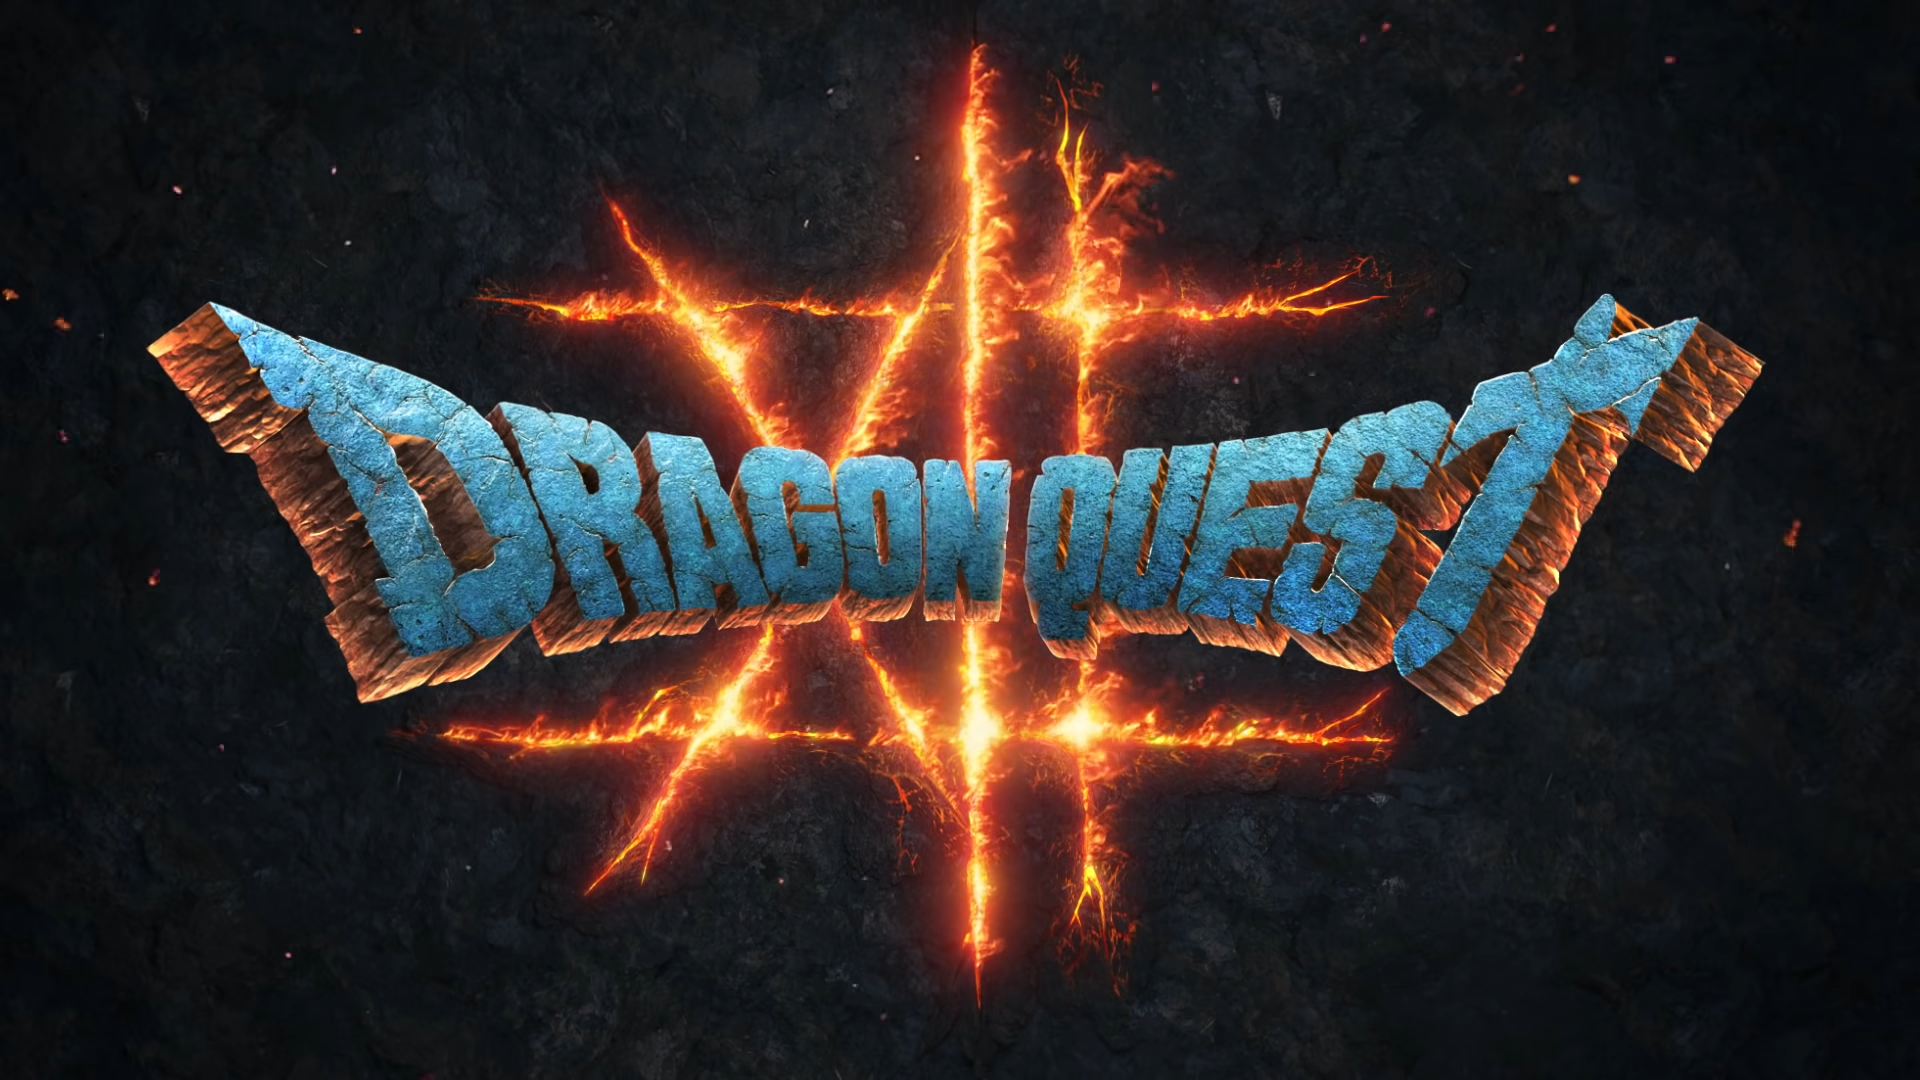 Dragon Quest X Could Finally Be Releasing in English 